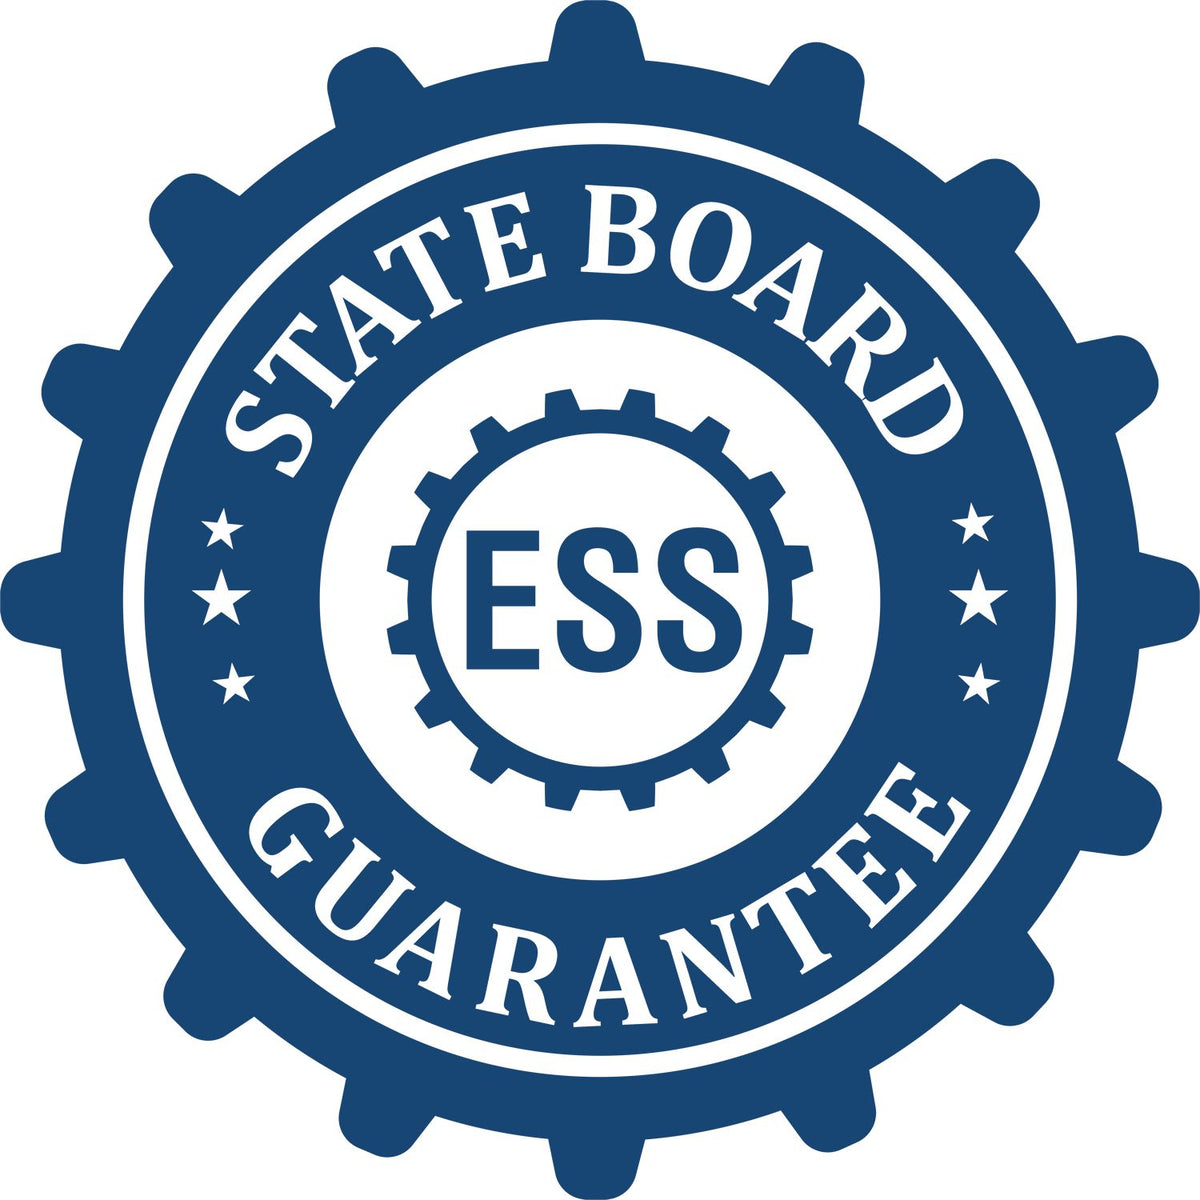 An emblem in a gear shape illustrating a state board guarantee for the Soft Montana Professional Engineer Seal product.